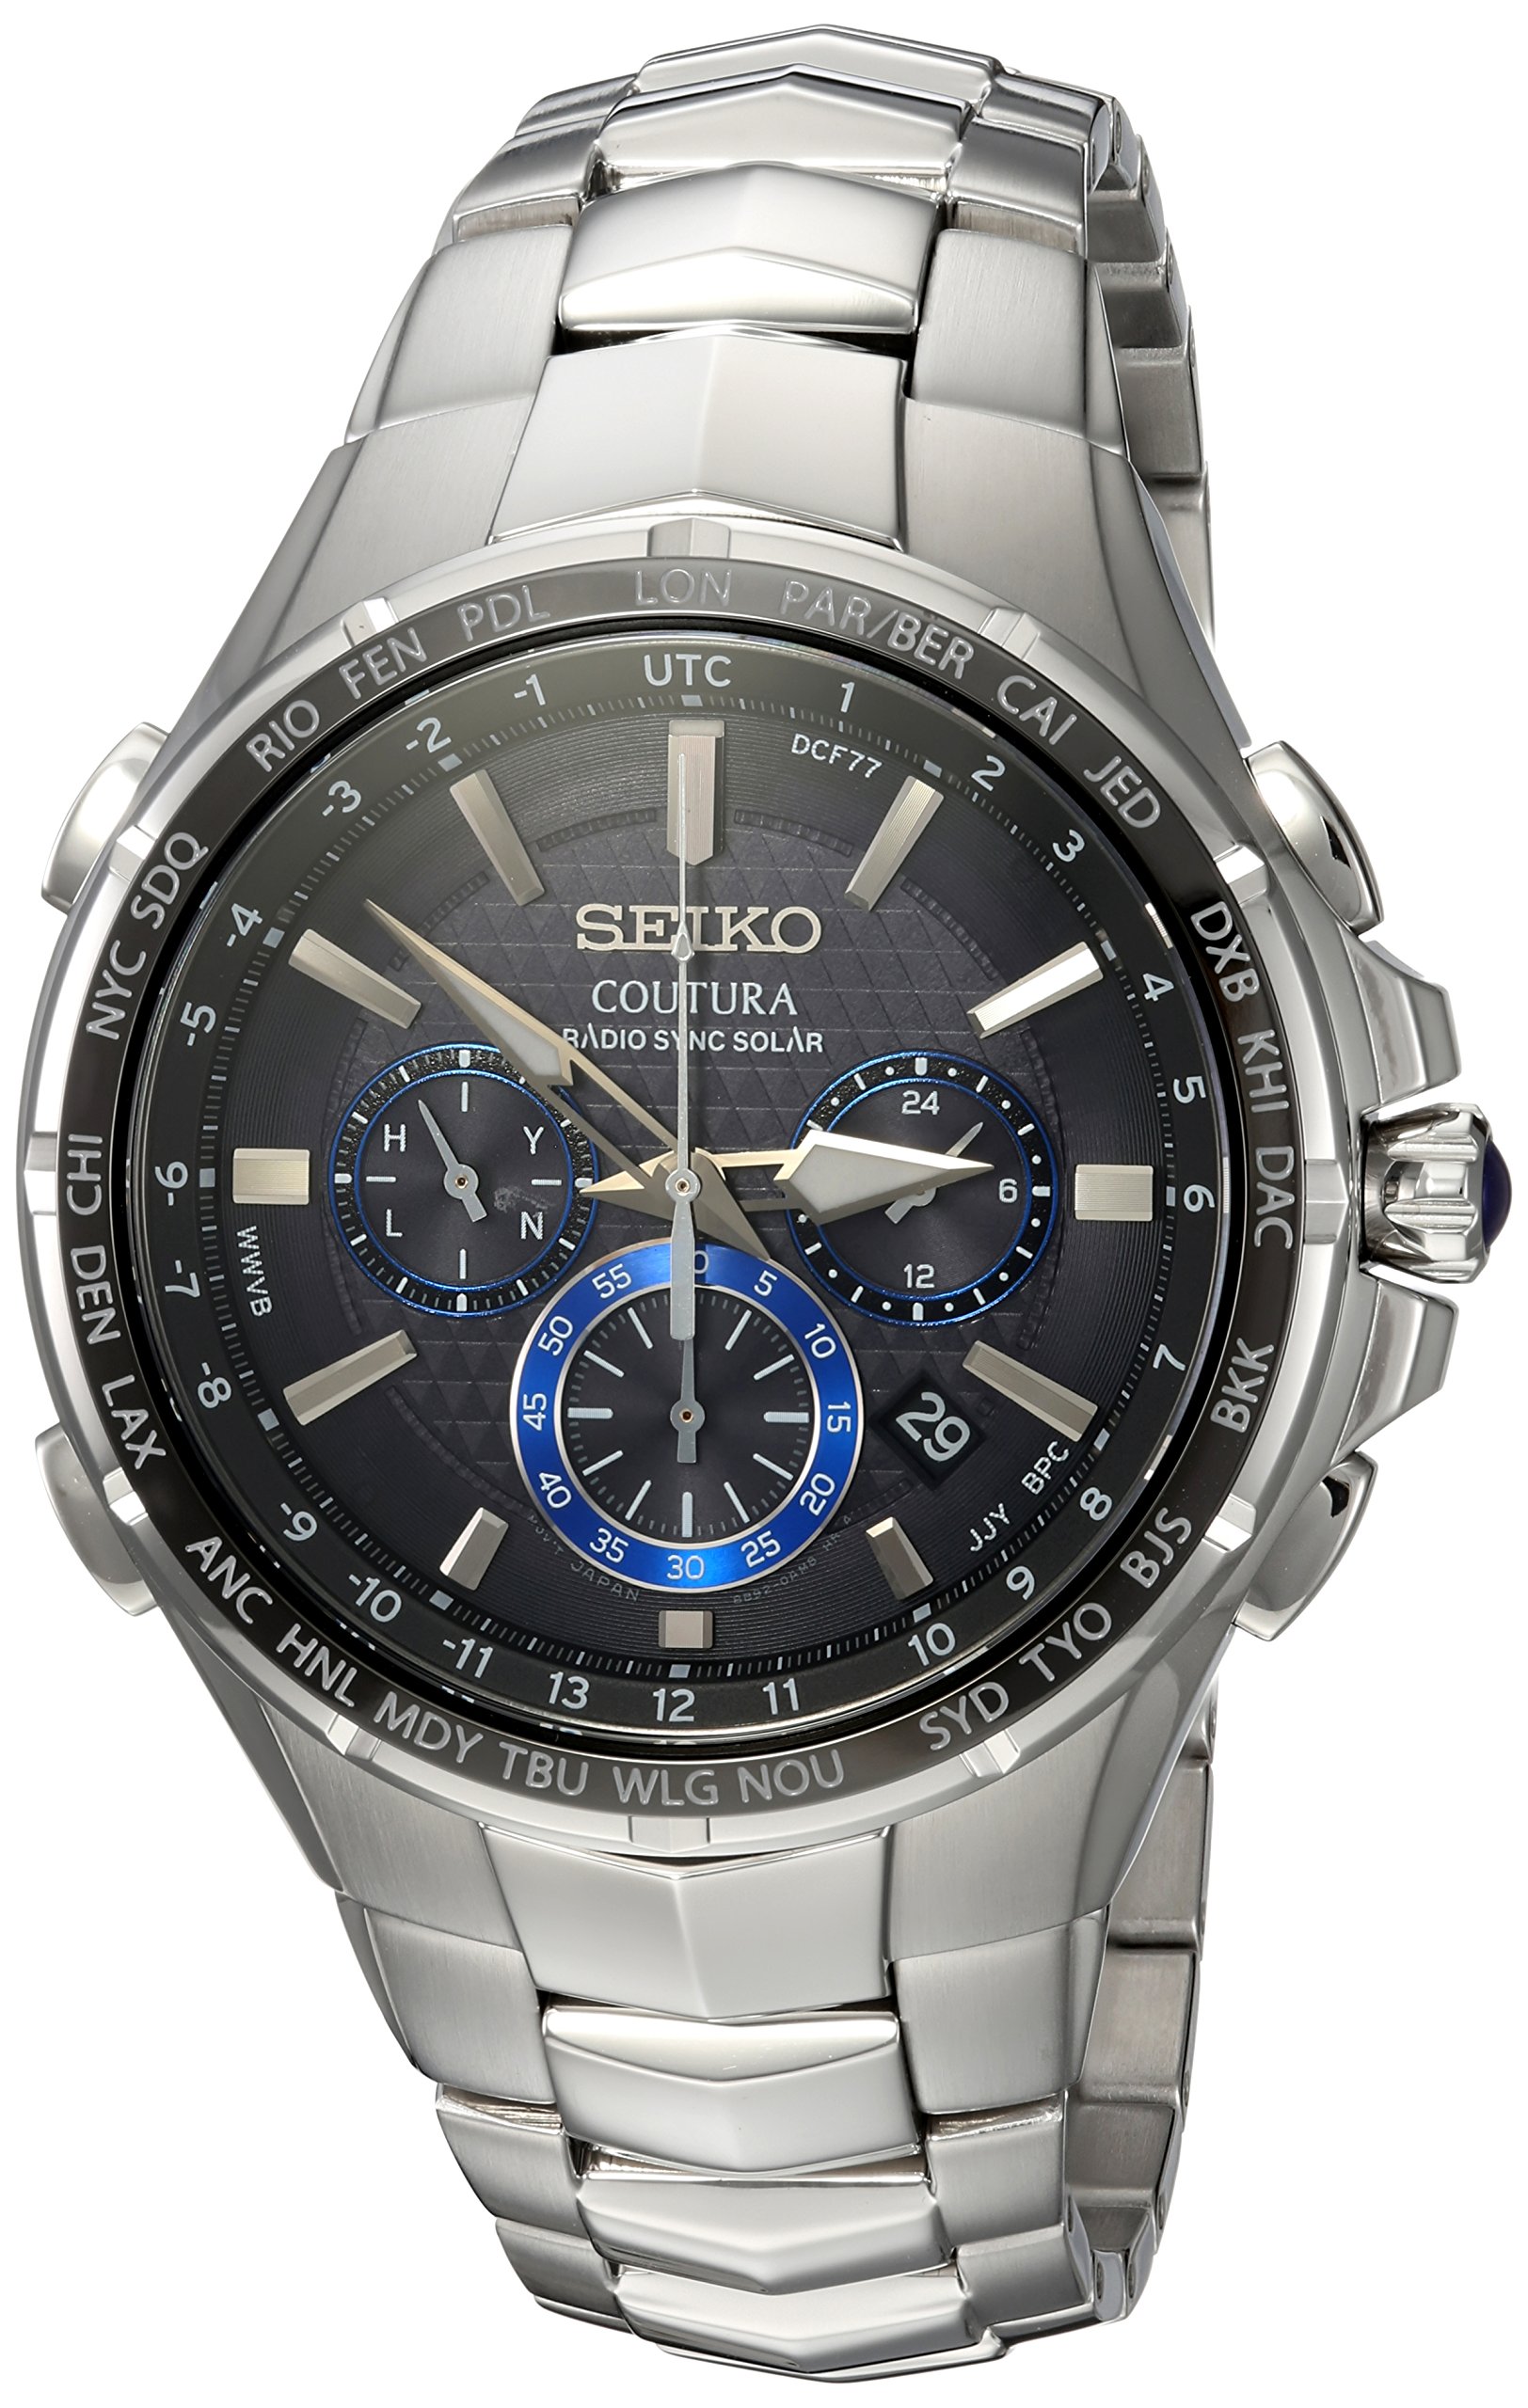 EIKO Men's COUTURA Stainless Steel Japanese-Quartz Watch with Stainless-Steel Strap, Silver, 26.3 (Model: SSG009) - $255.69 at Amazon